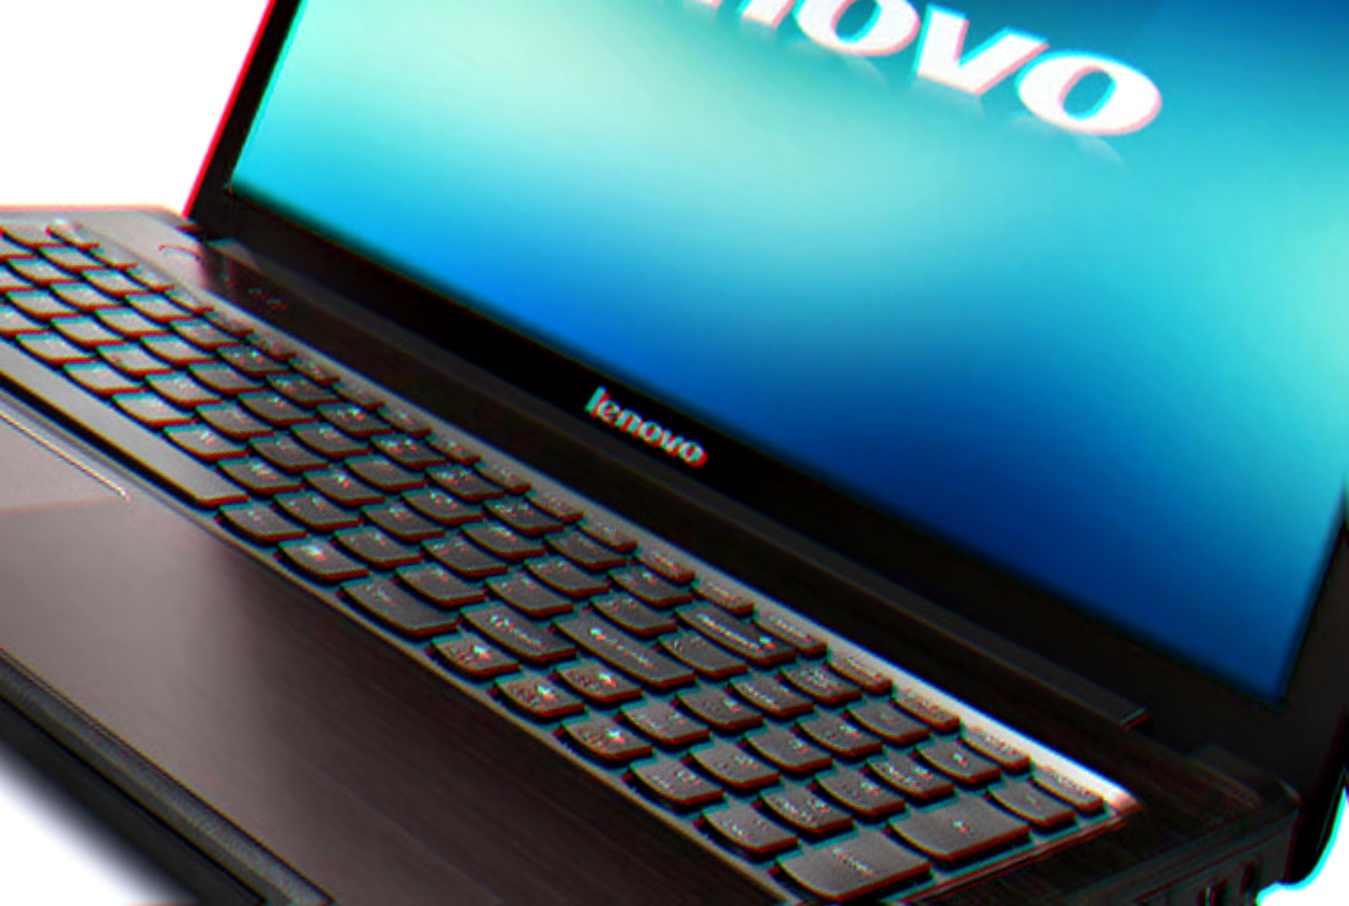 Lenovo to pay $ for installing adware in 750,000 laptops